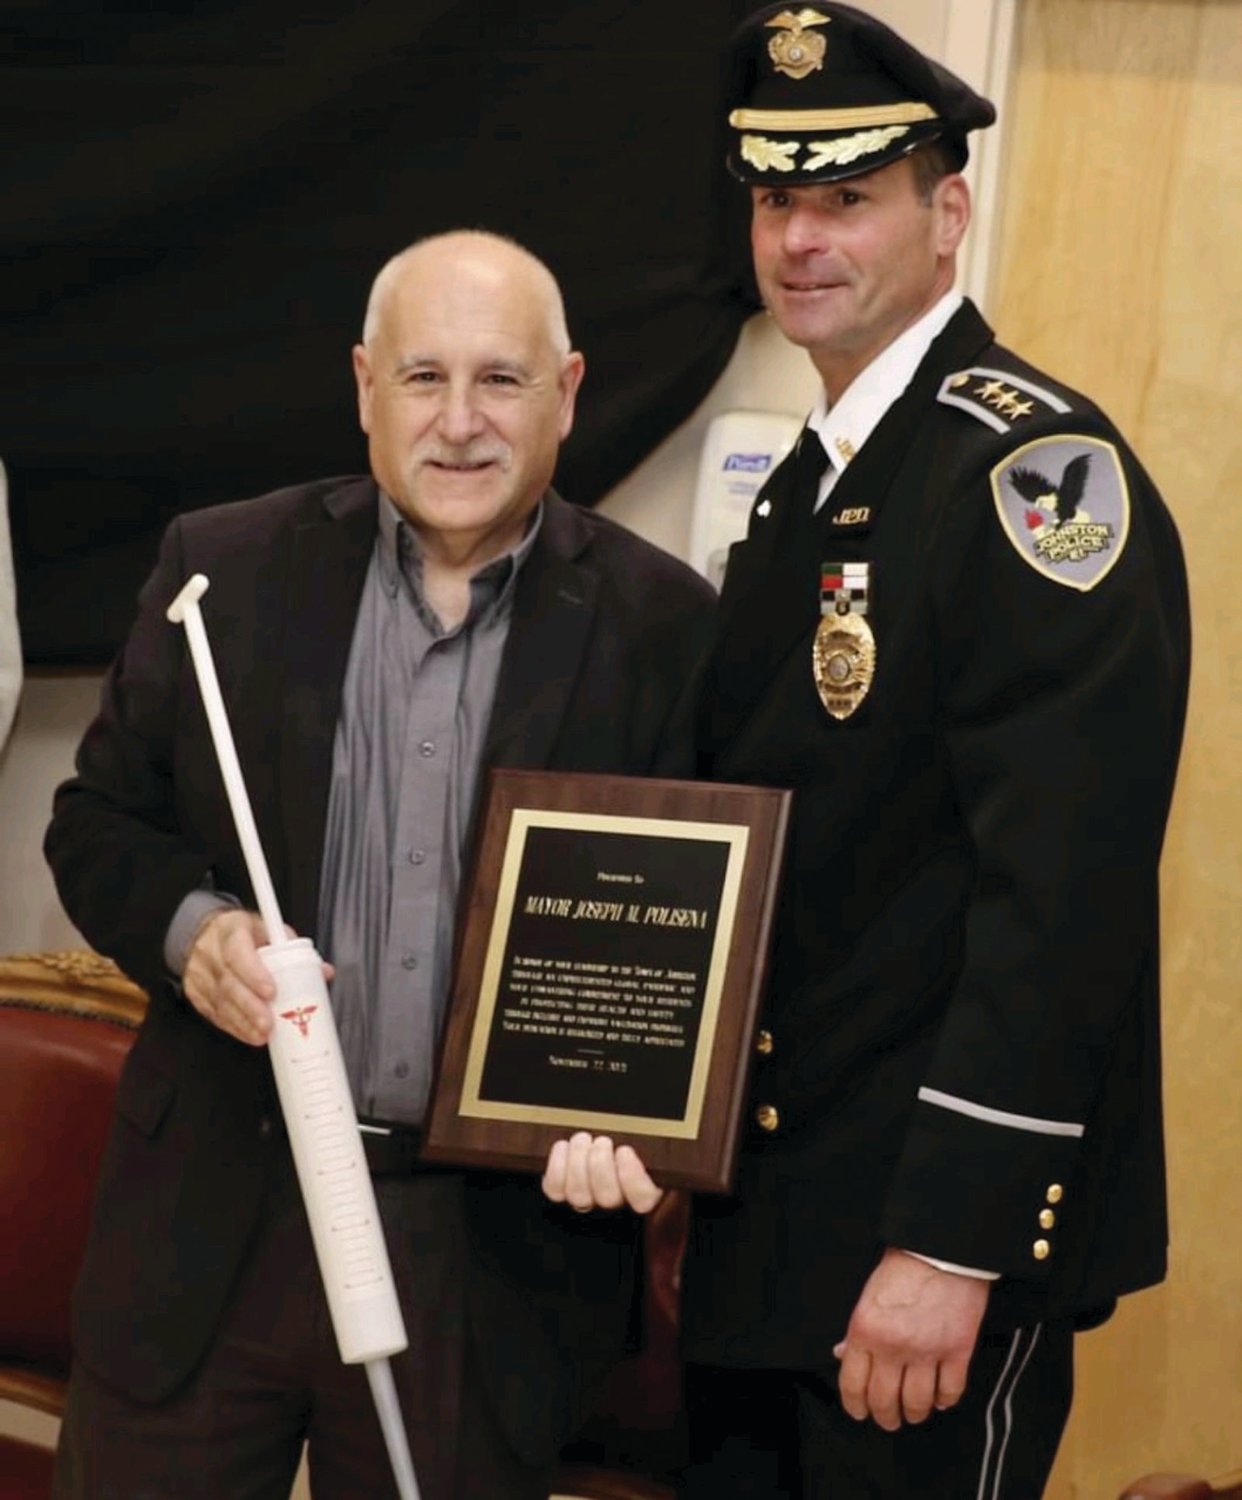 BIG SHOT: Johnston Mayor Joseph M. Polisena in all smiles after receiving two awards — an inflated syringe and the JPD’s Civilians Award for Meritorious Acts — from Police Chief Joseph Razza during the recent Recognition of Excellence Ceremony.